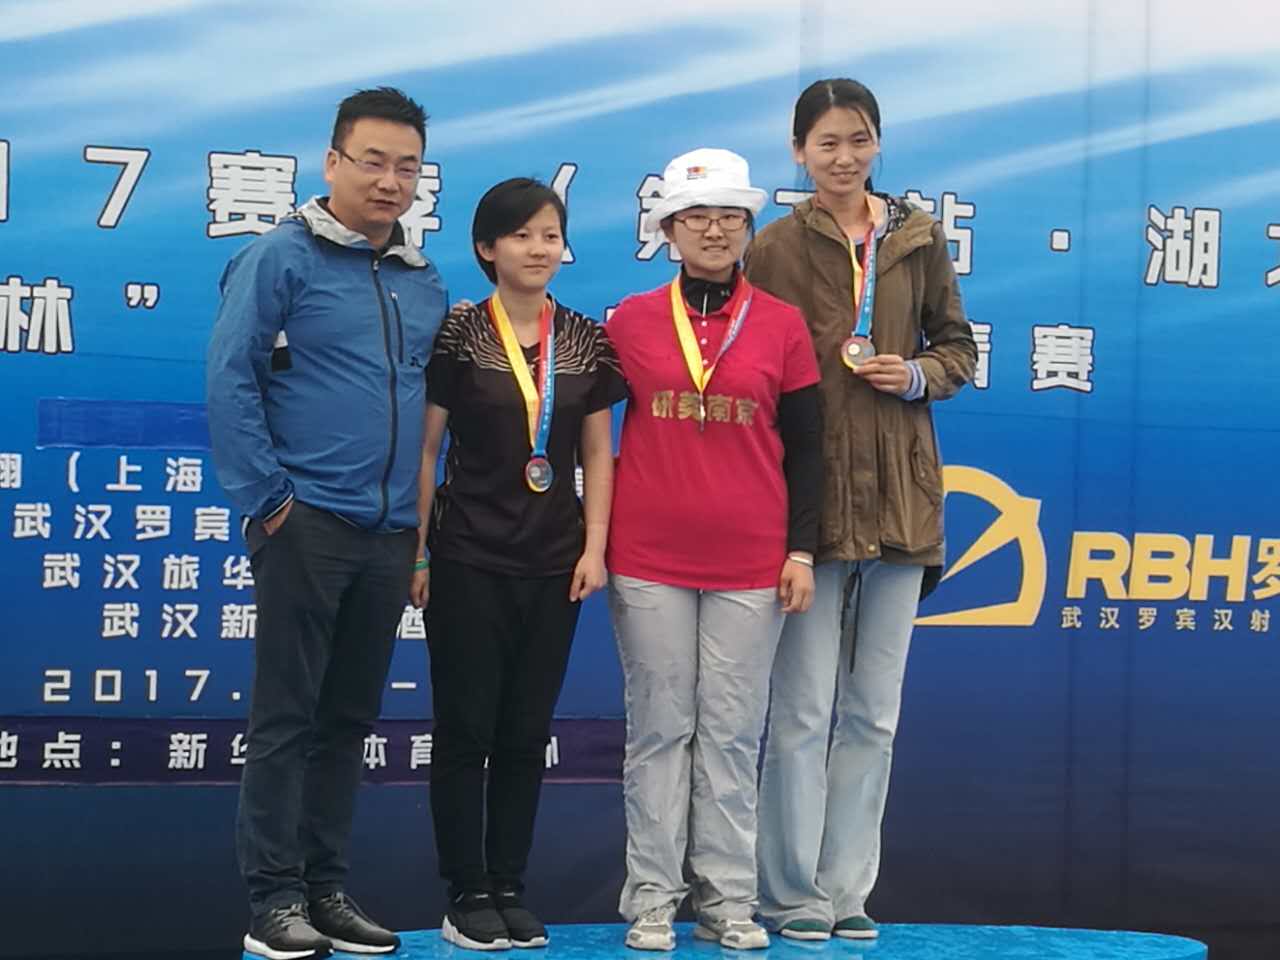 Yanmei Archery Team - Lin Yawen - won the first place in the third leg of the 2017 ACAC season